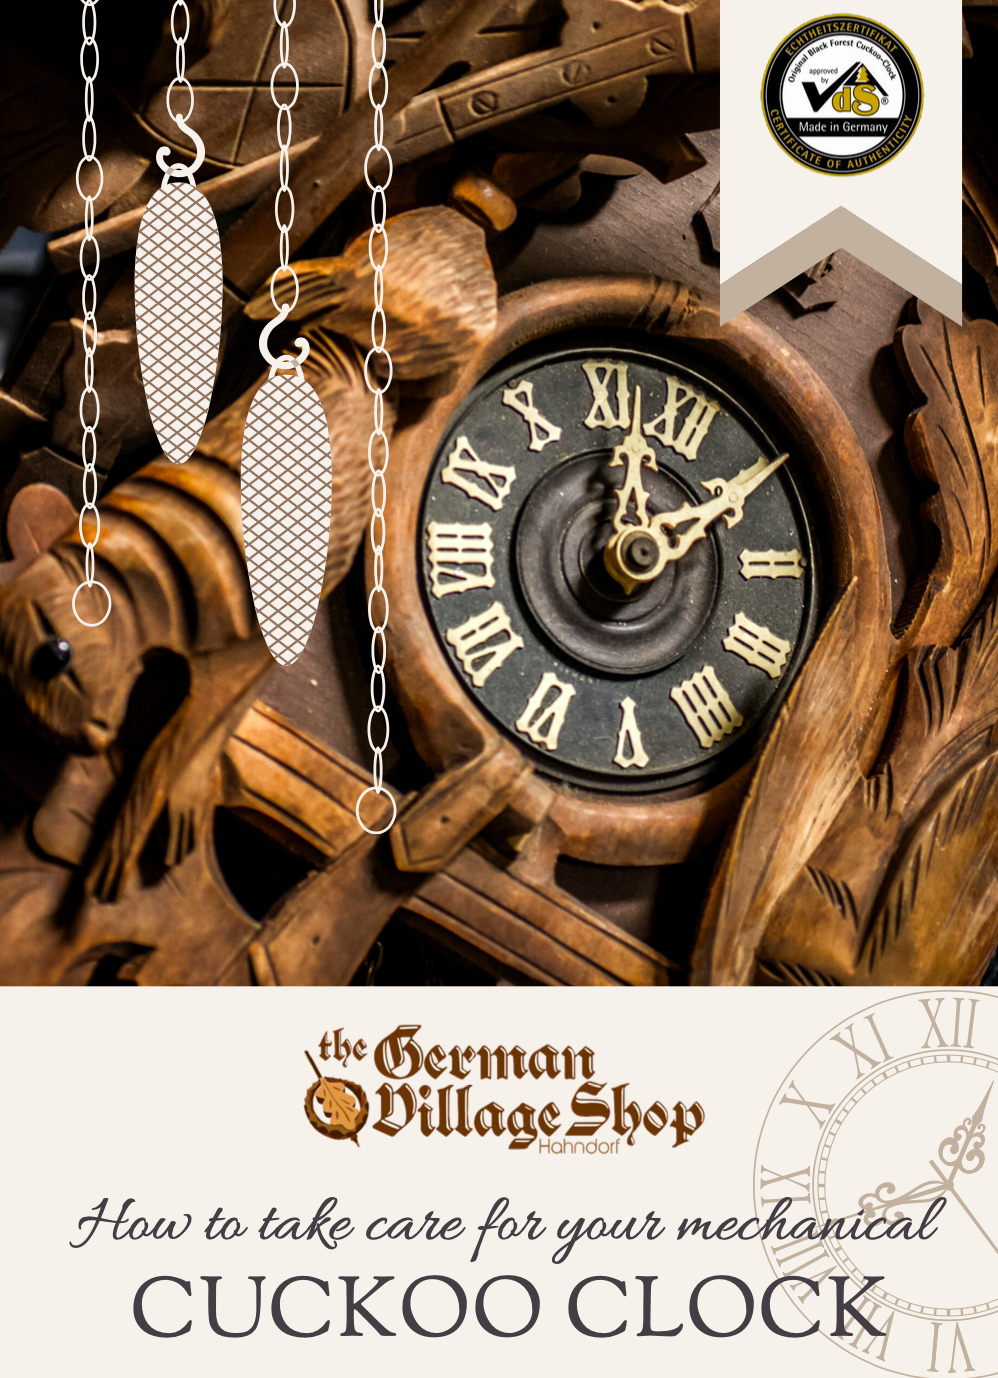 Mechanical cuckoo clock care PDF from The German Village Shop